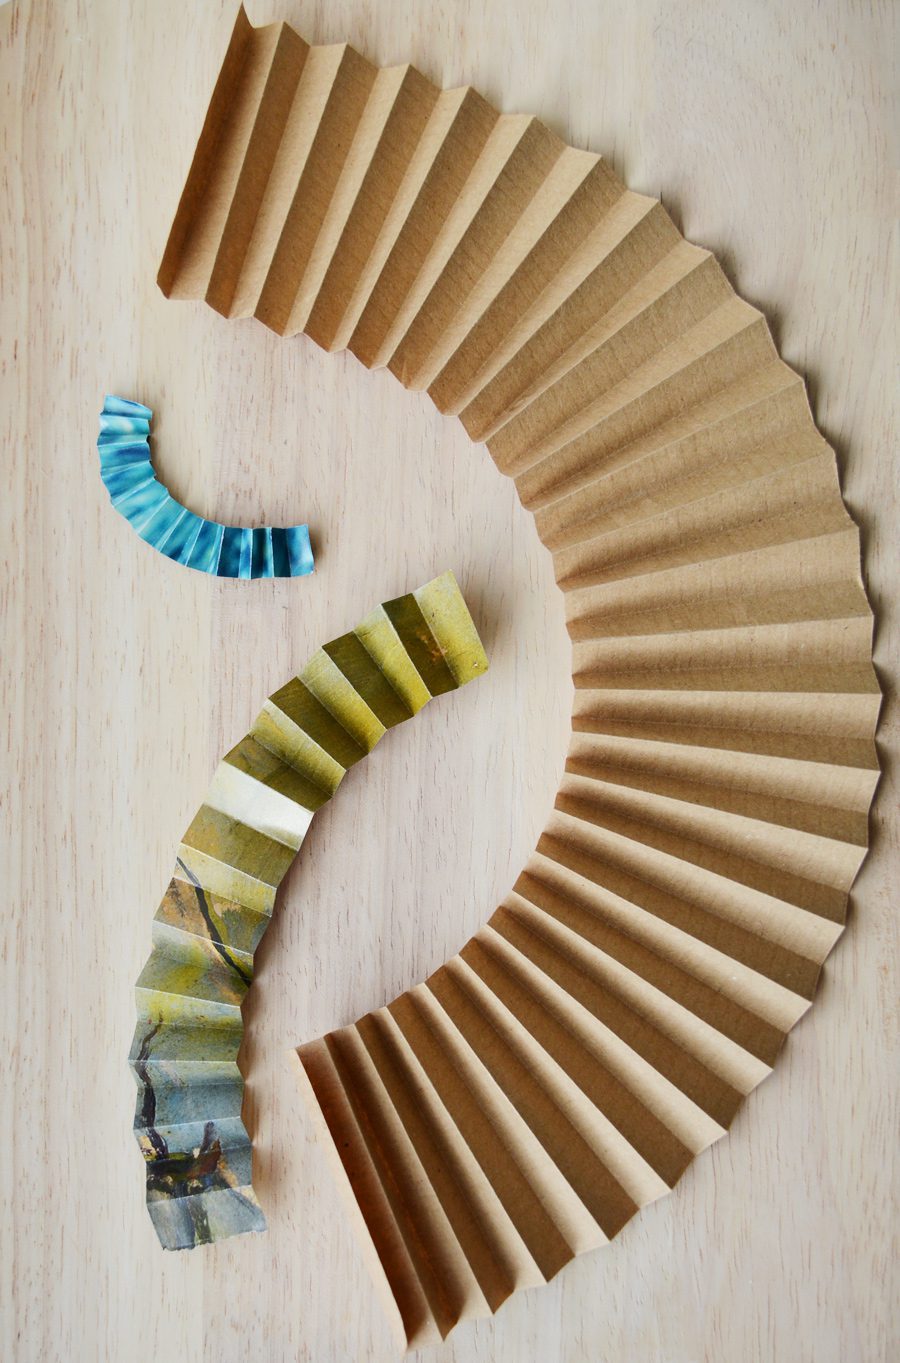 DIY paper wheels (at the exact size you want them) craftingfingers.co.uk #crafts #diy